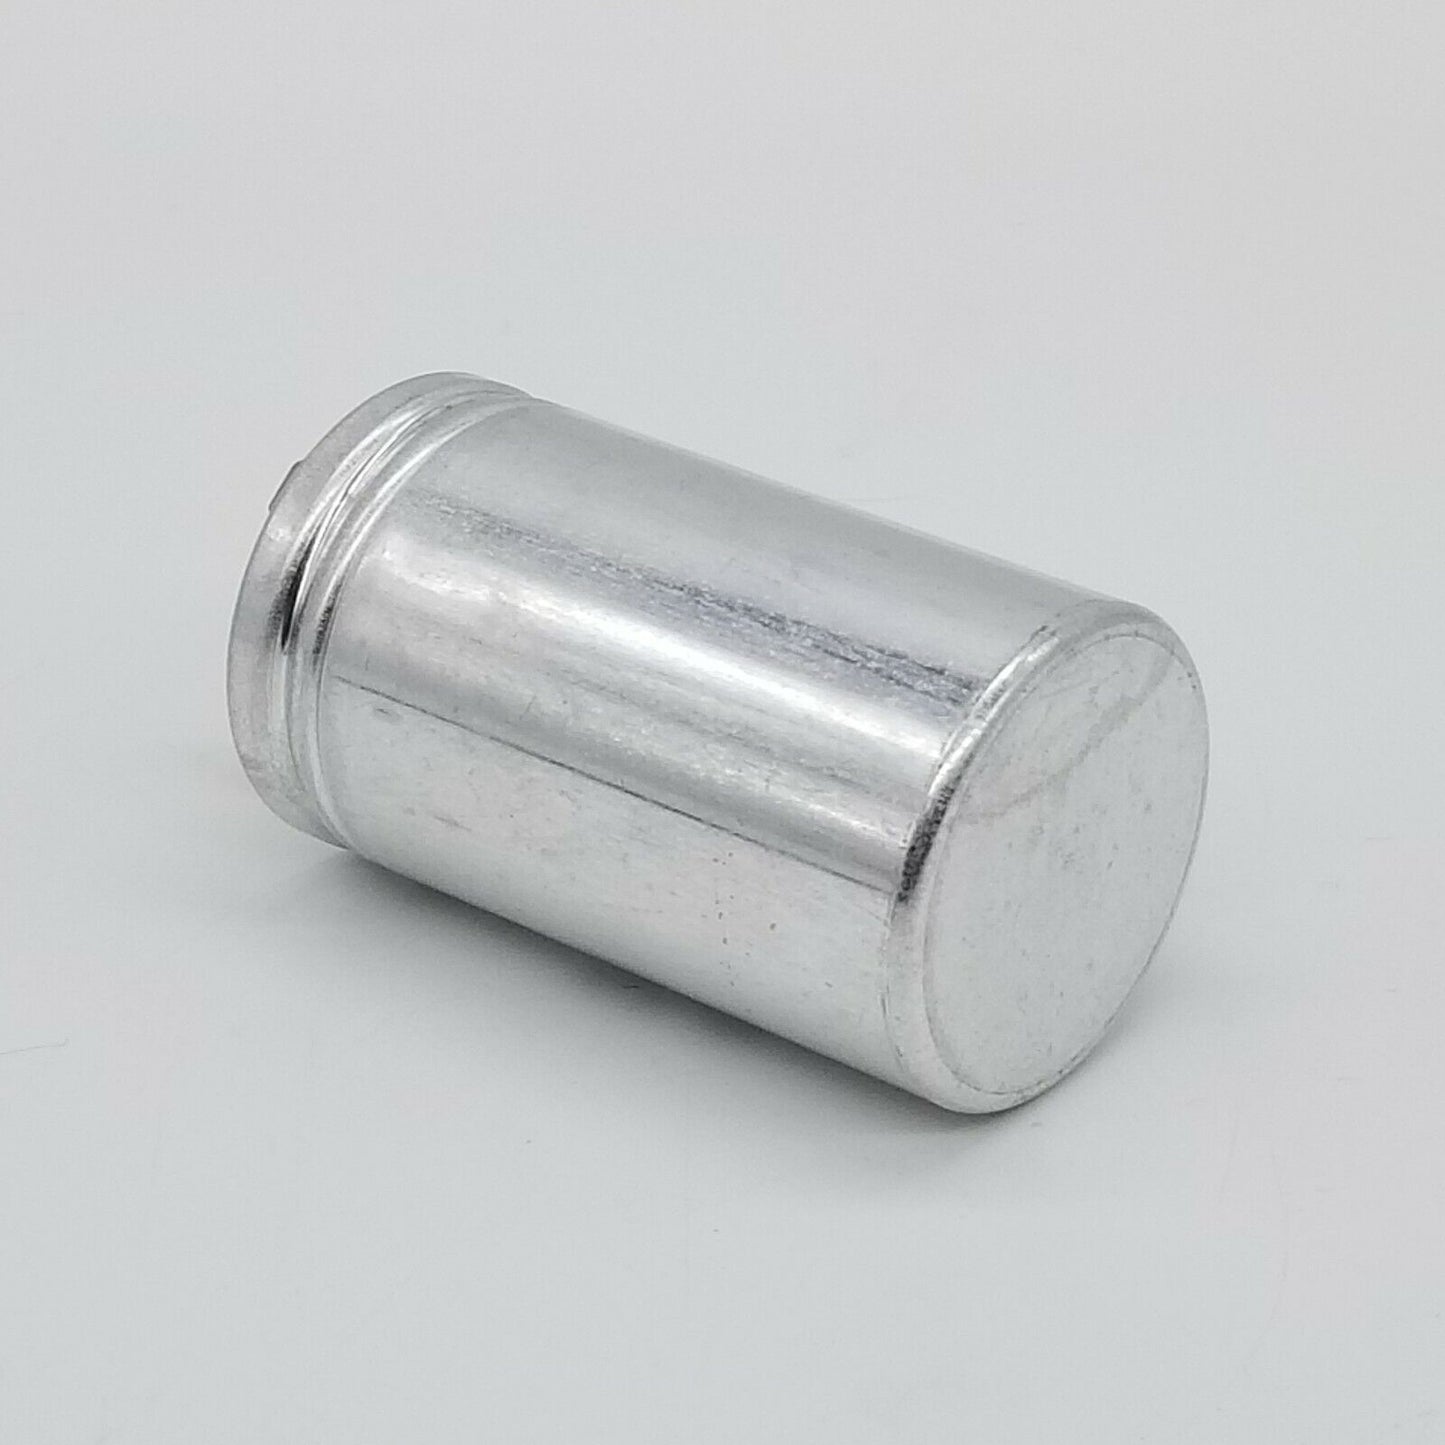 New OEM Replacement for Bosch Replacement for Thermador Range Capacitor 00418385